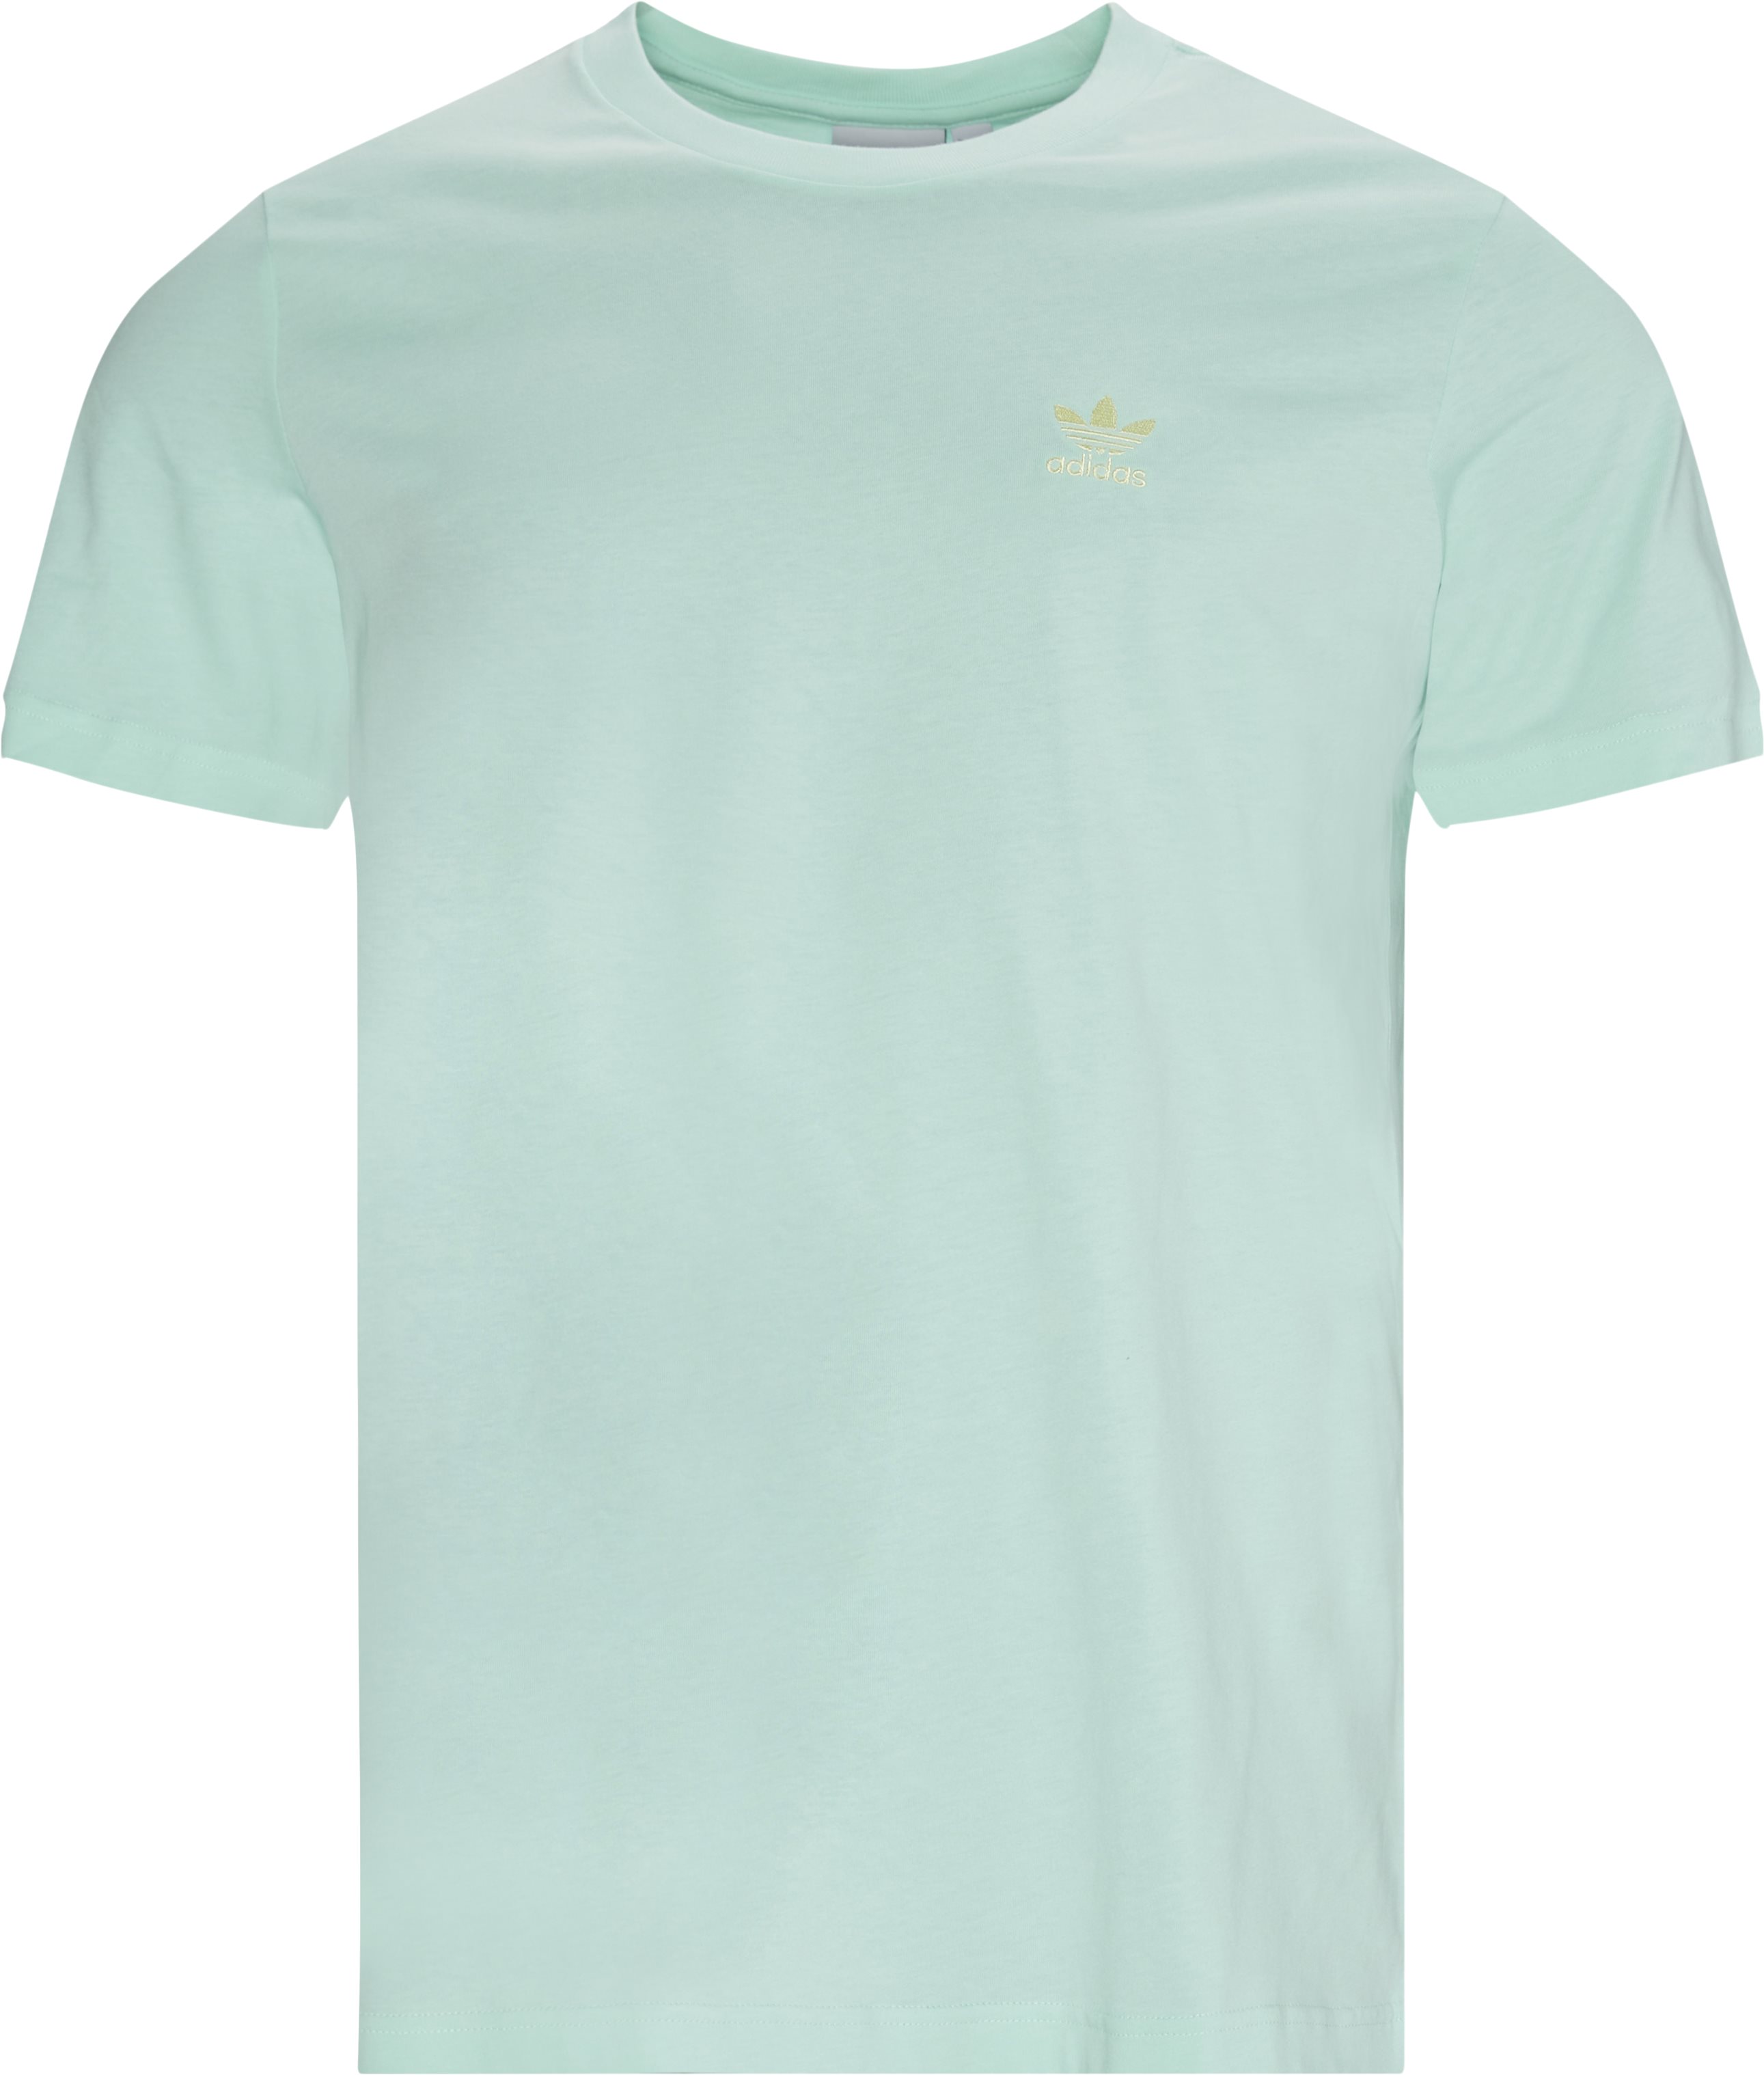 Essential Tee - T-shirts - Regular fit - Turquoise